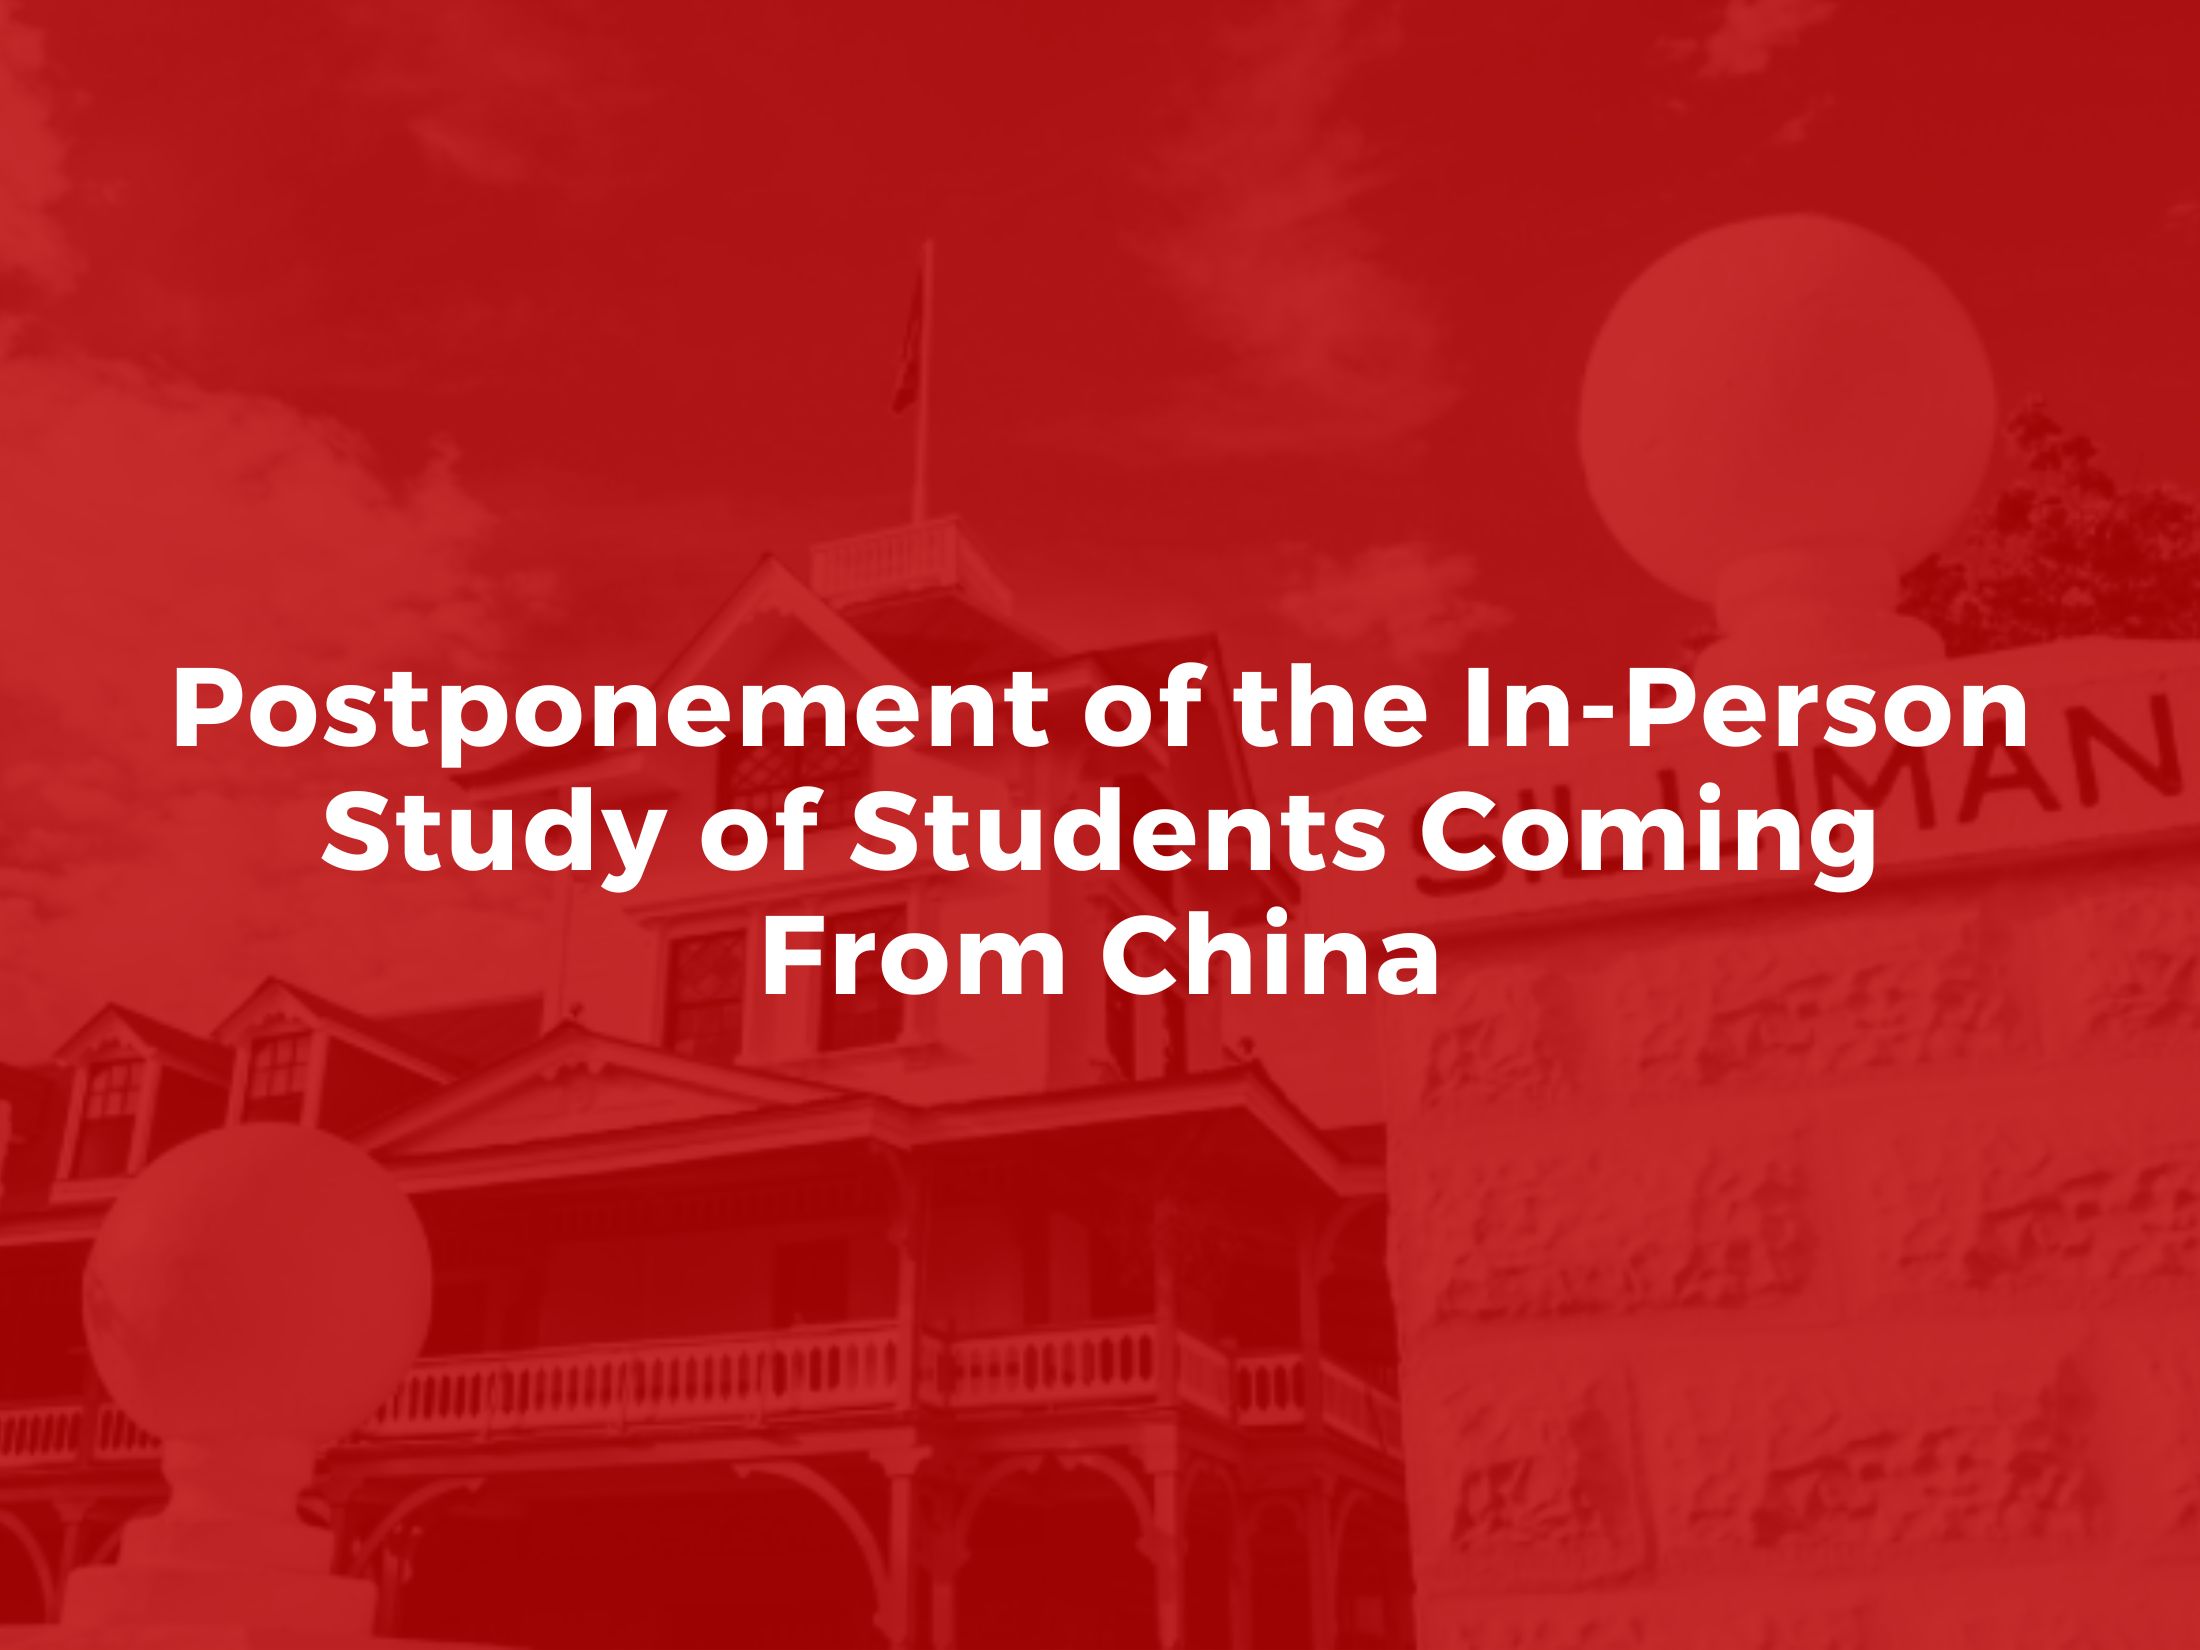 Announcement: Postponement of the In-Person Study of Students Coming From China